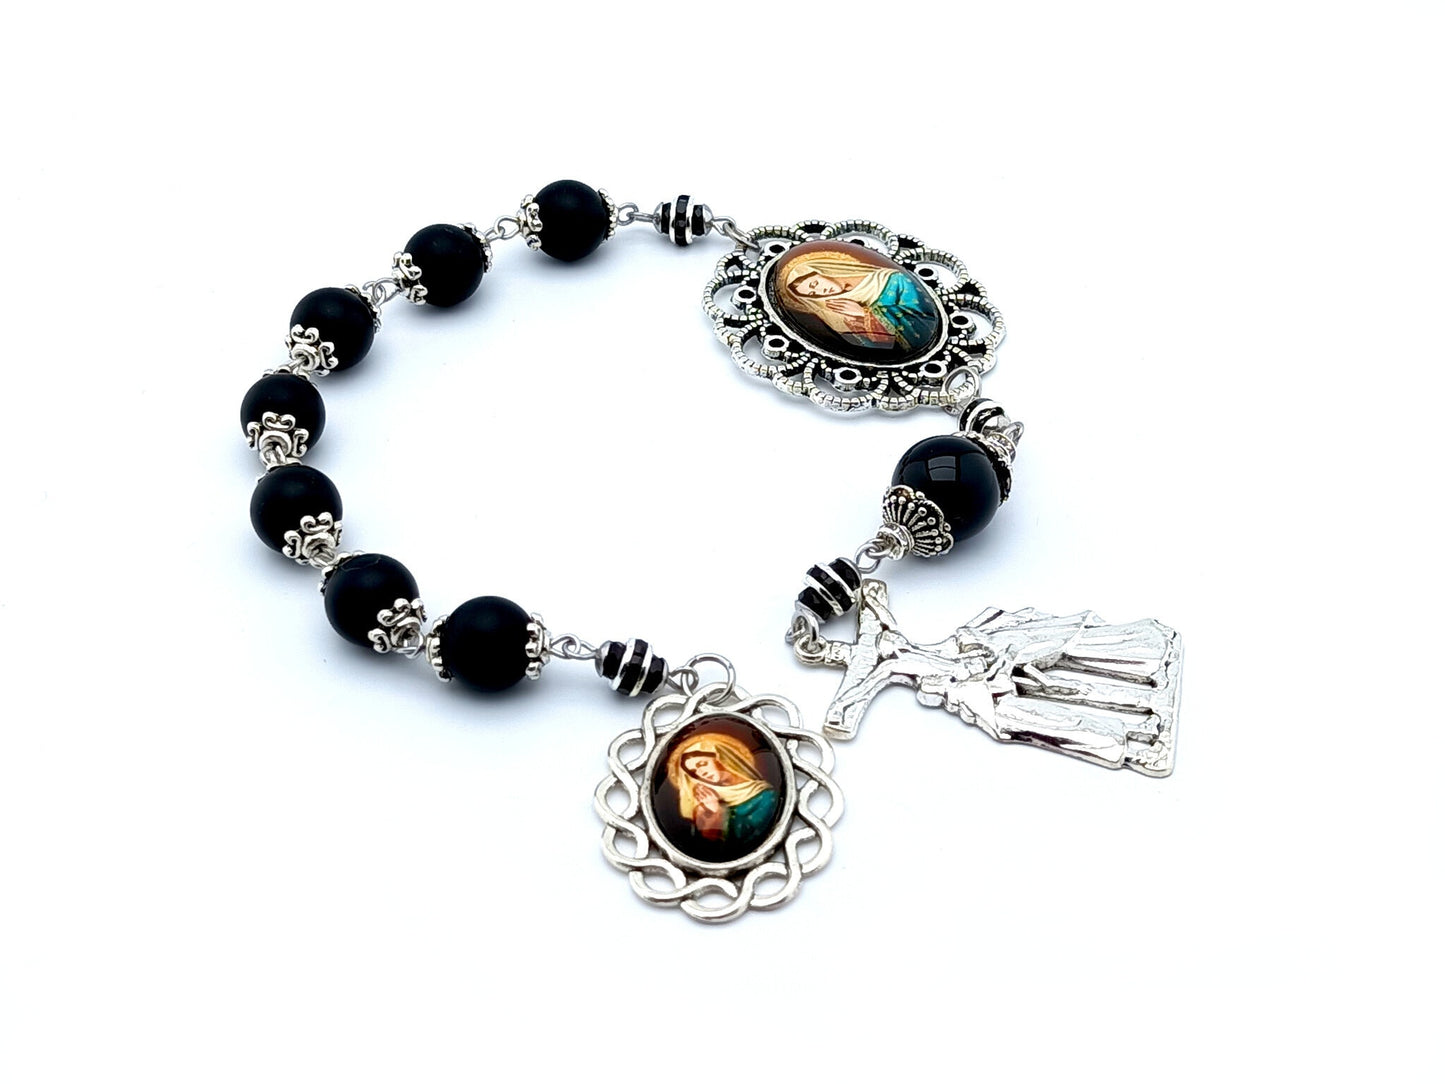 Our Lady of Sorrows unique rosary beads dolor servite rosary with black onyx gemstone beads, two Marys crucifix and picture centre and end medals.